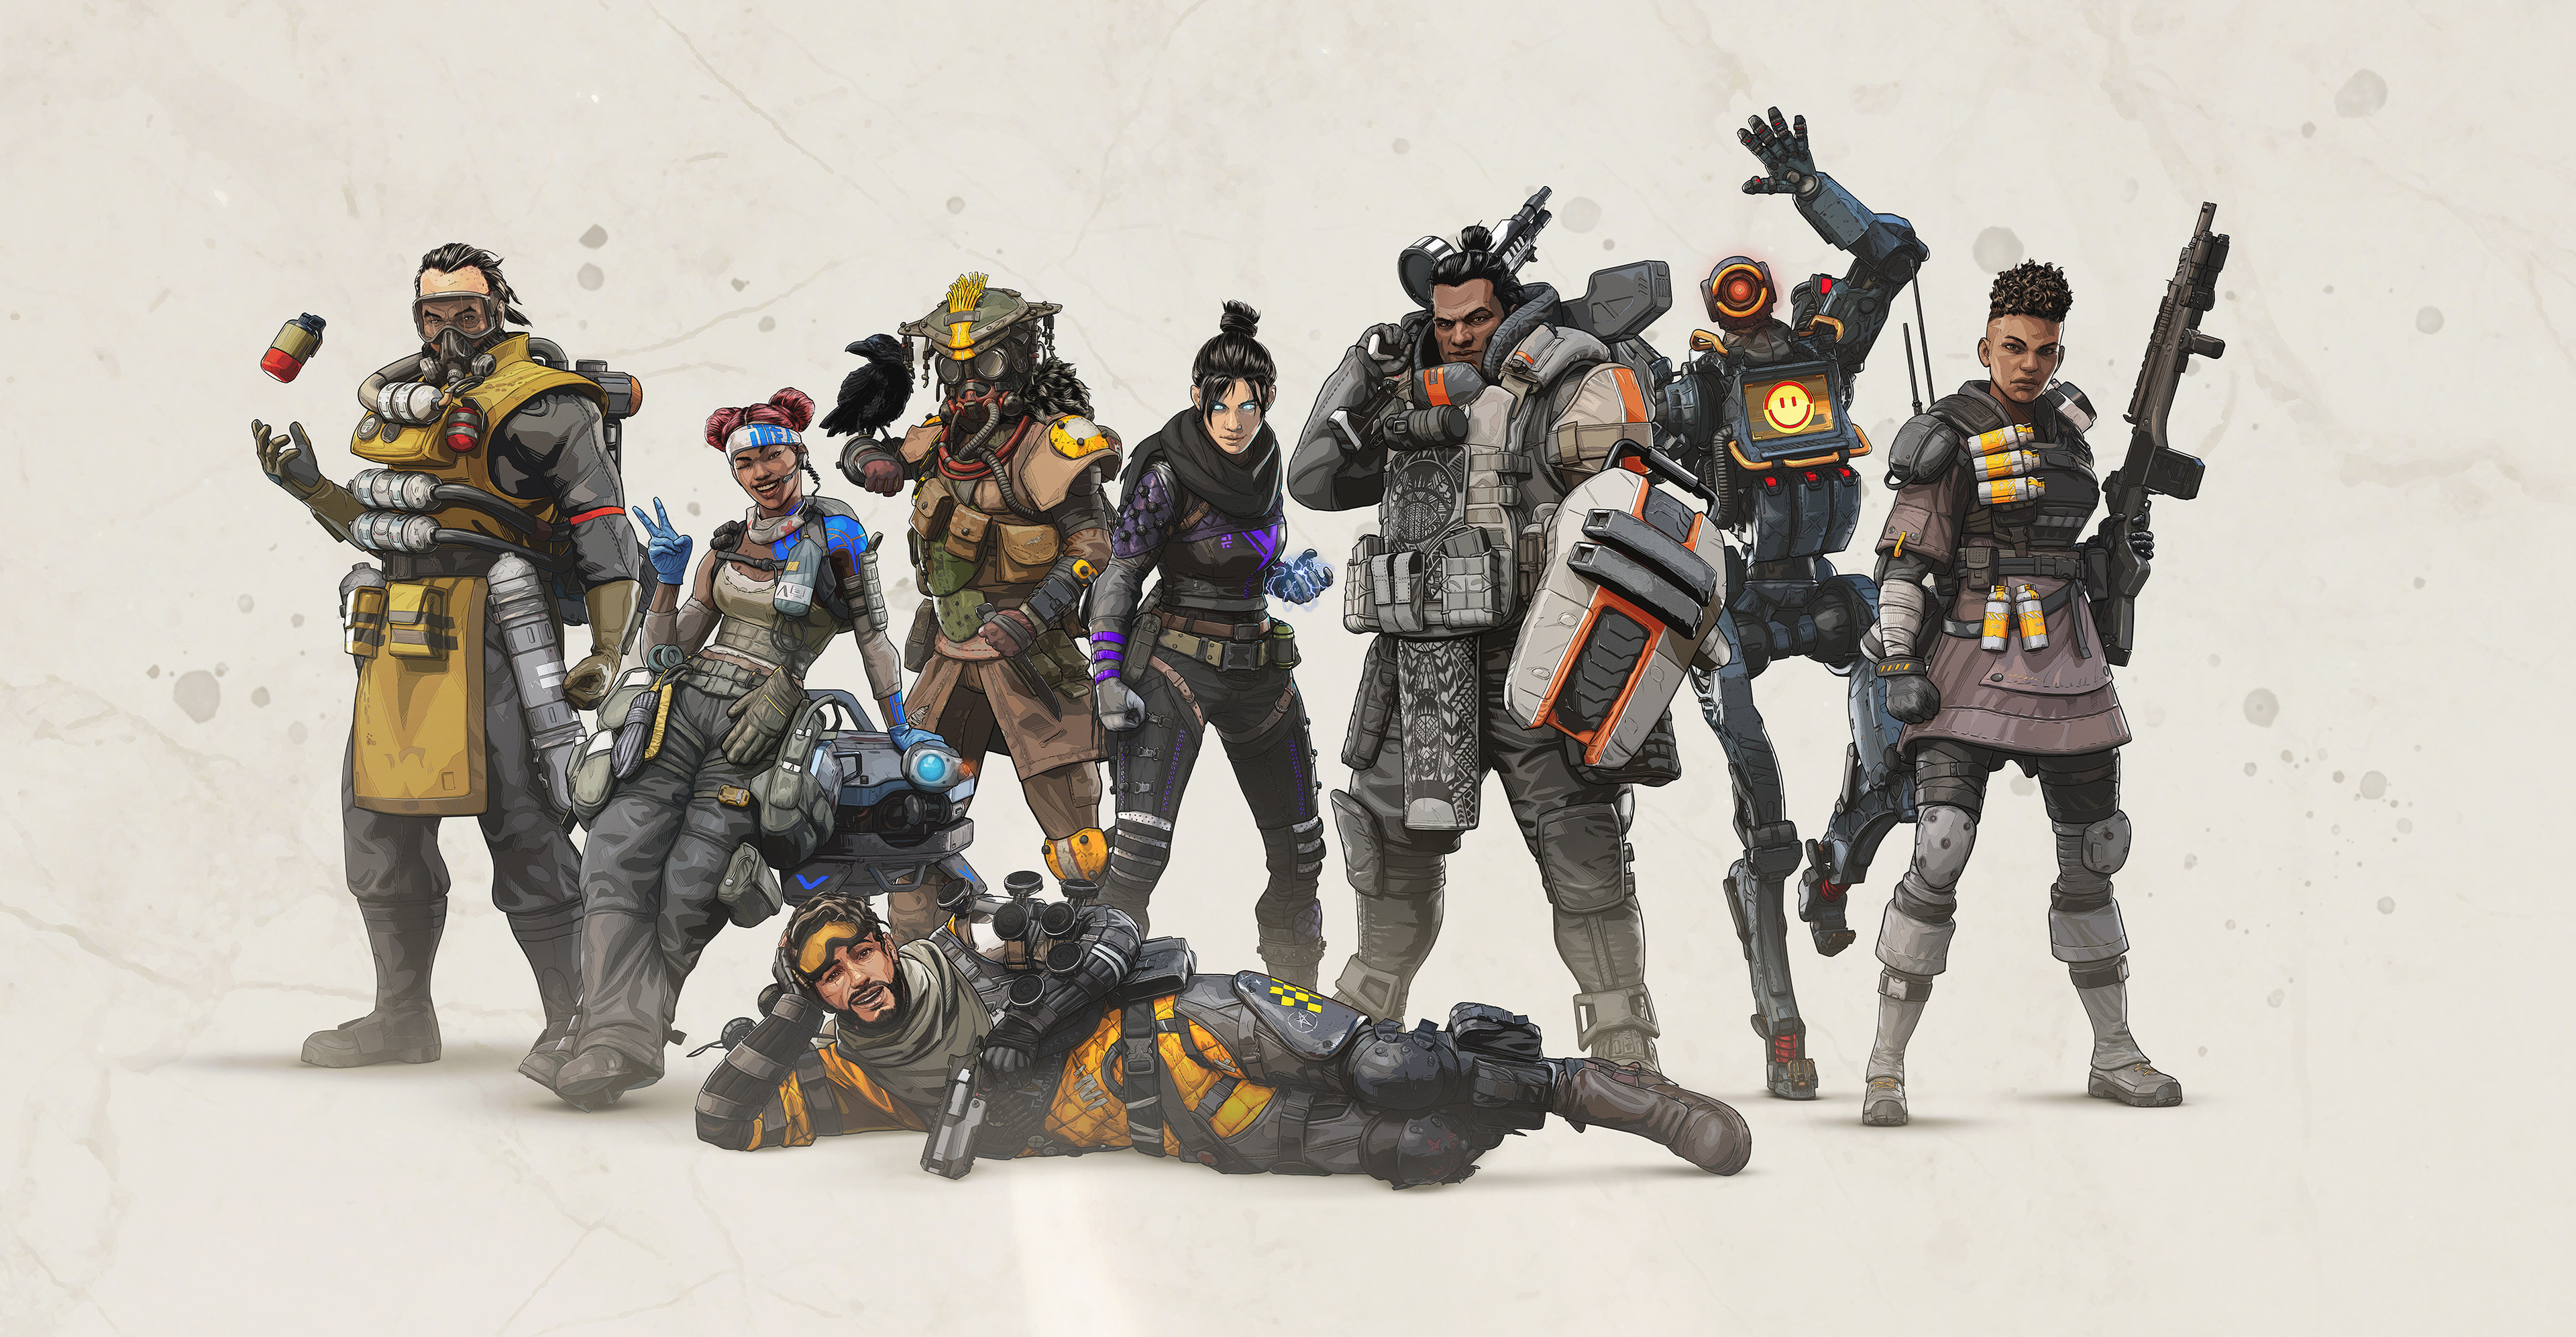 Full cast lineup at launch for Apex Legends.